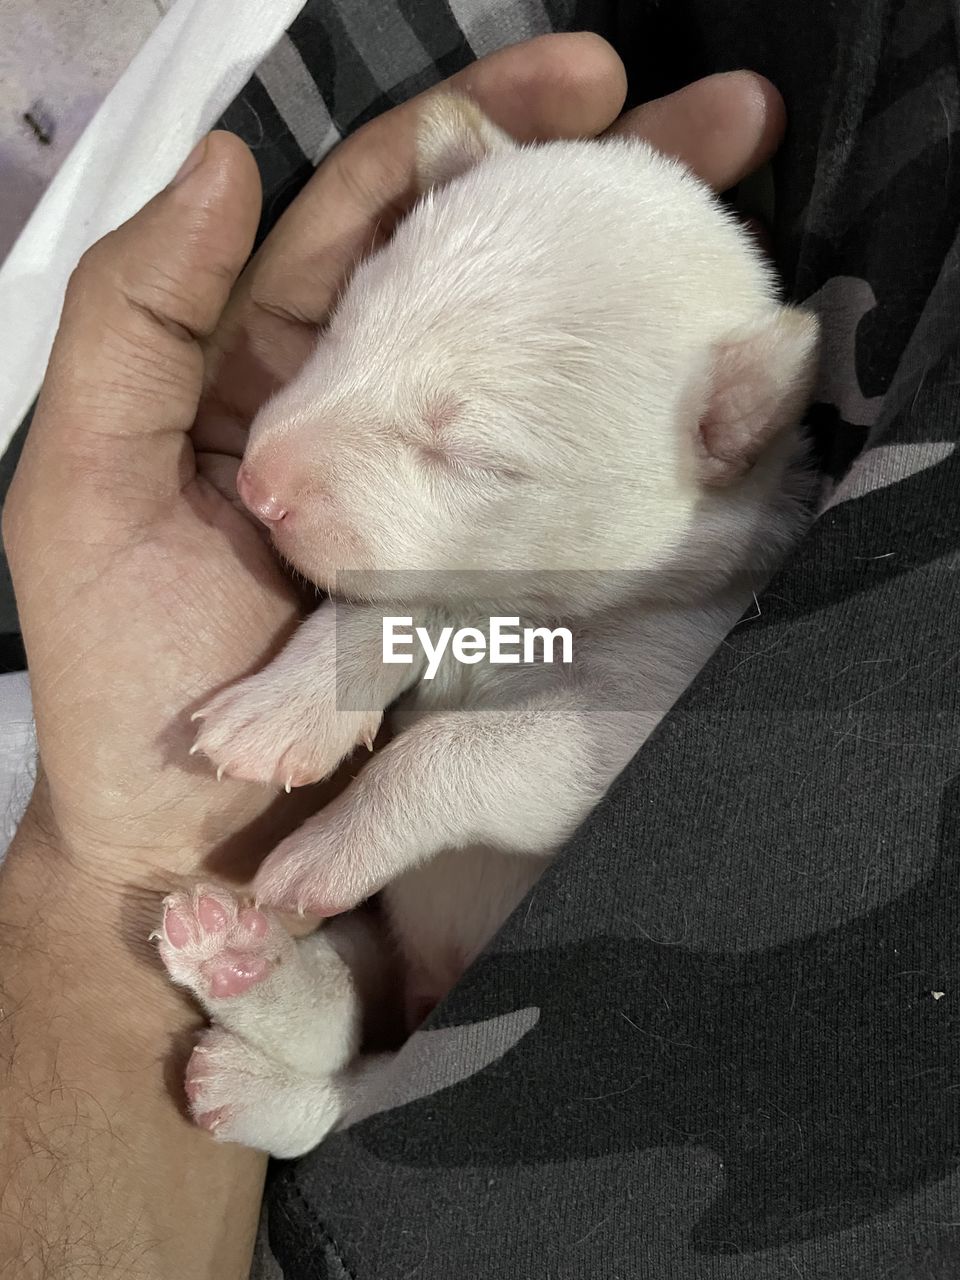 animal themes, animal, mammal, pet, one animal, domestic animals, relaxation, sleeping, nose, puppy, hand, young animal, cat, indoors, dog, lying down, cute, canine, animal body part, eyes closed, resting, high angle view, lap dog, limb, paw